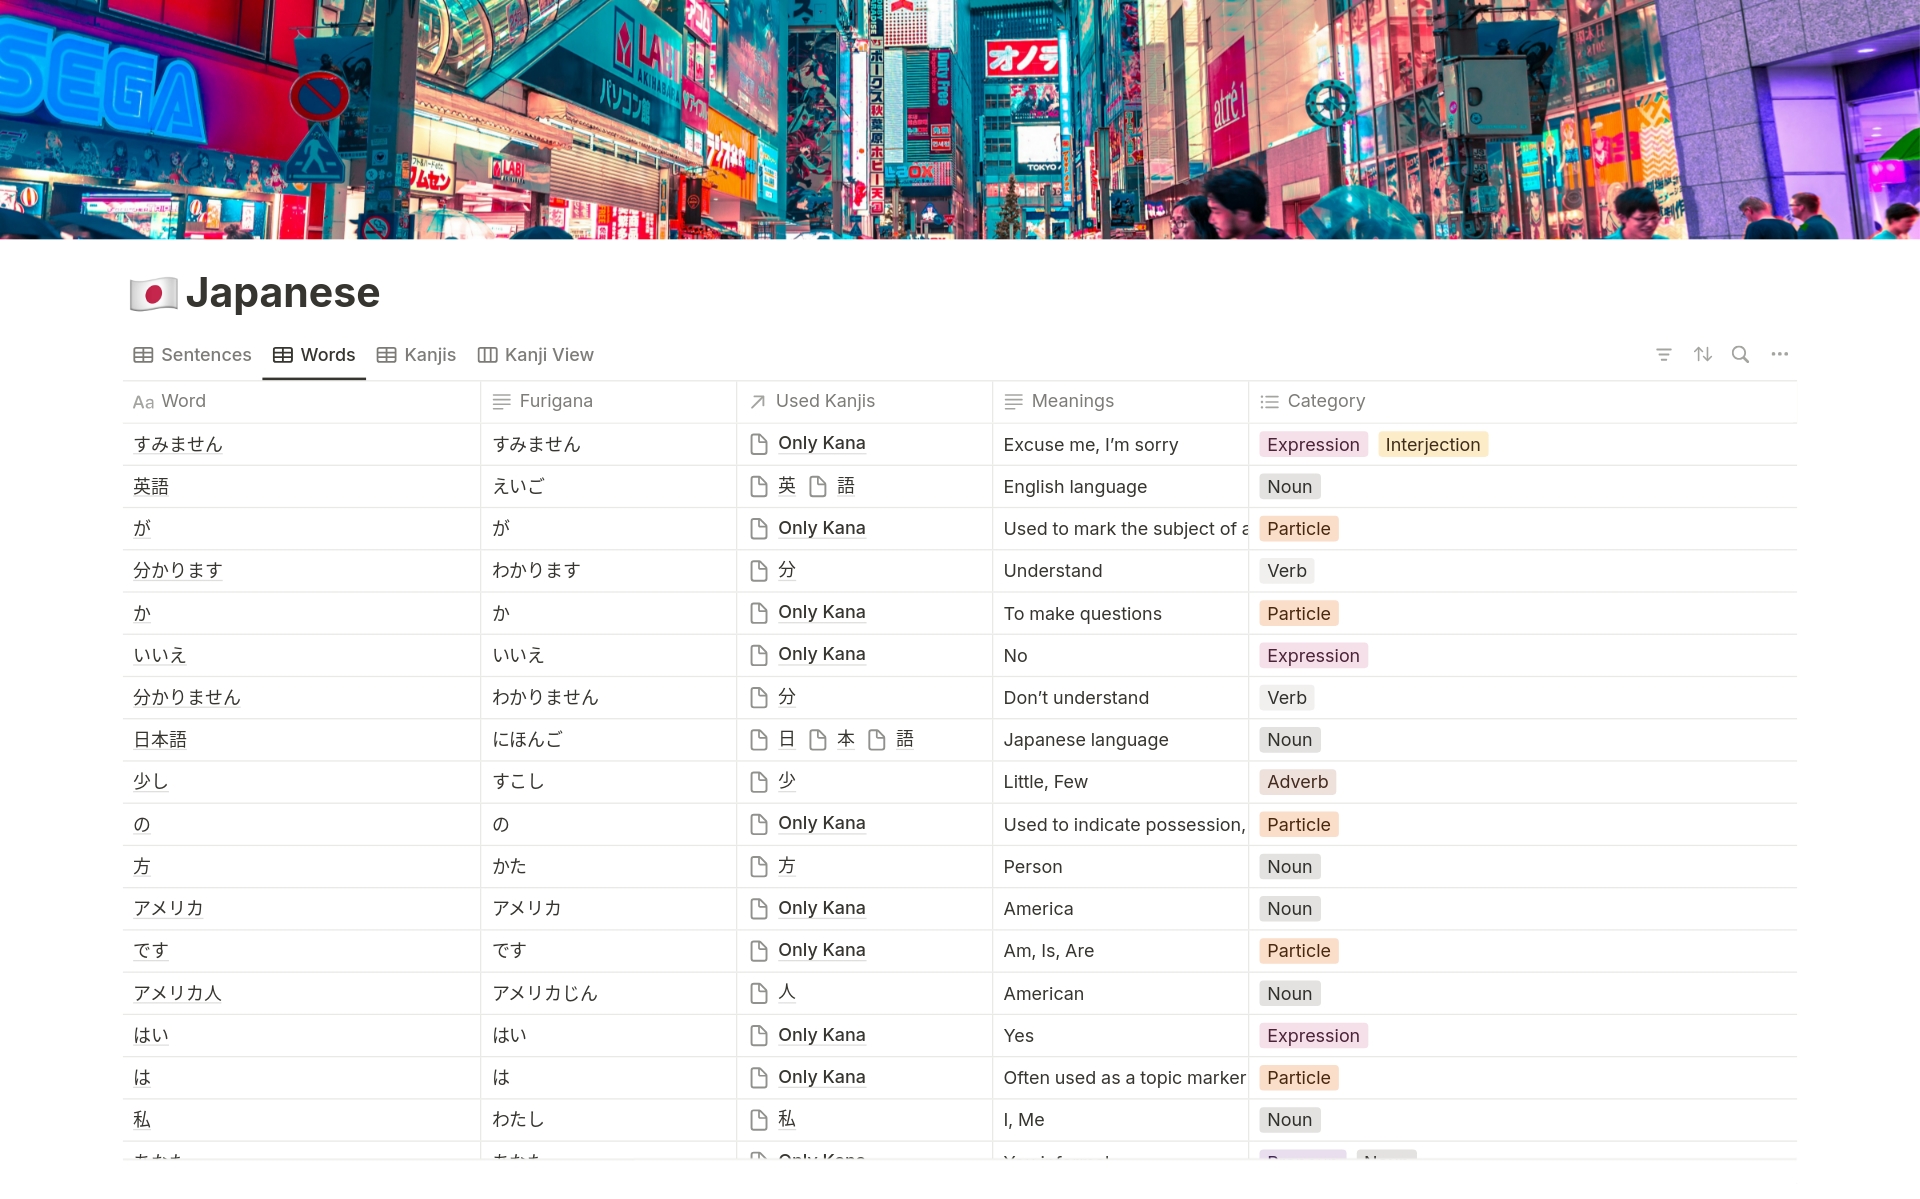 With our template, you can easily register all the words you learn in a personalized list. Additionally, you can create sentences using these words, which helps contextualize them and solidify your vocabulary knowledge.